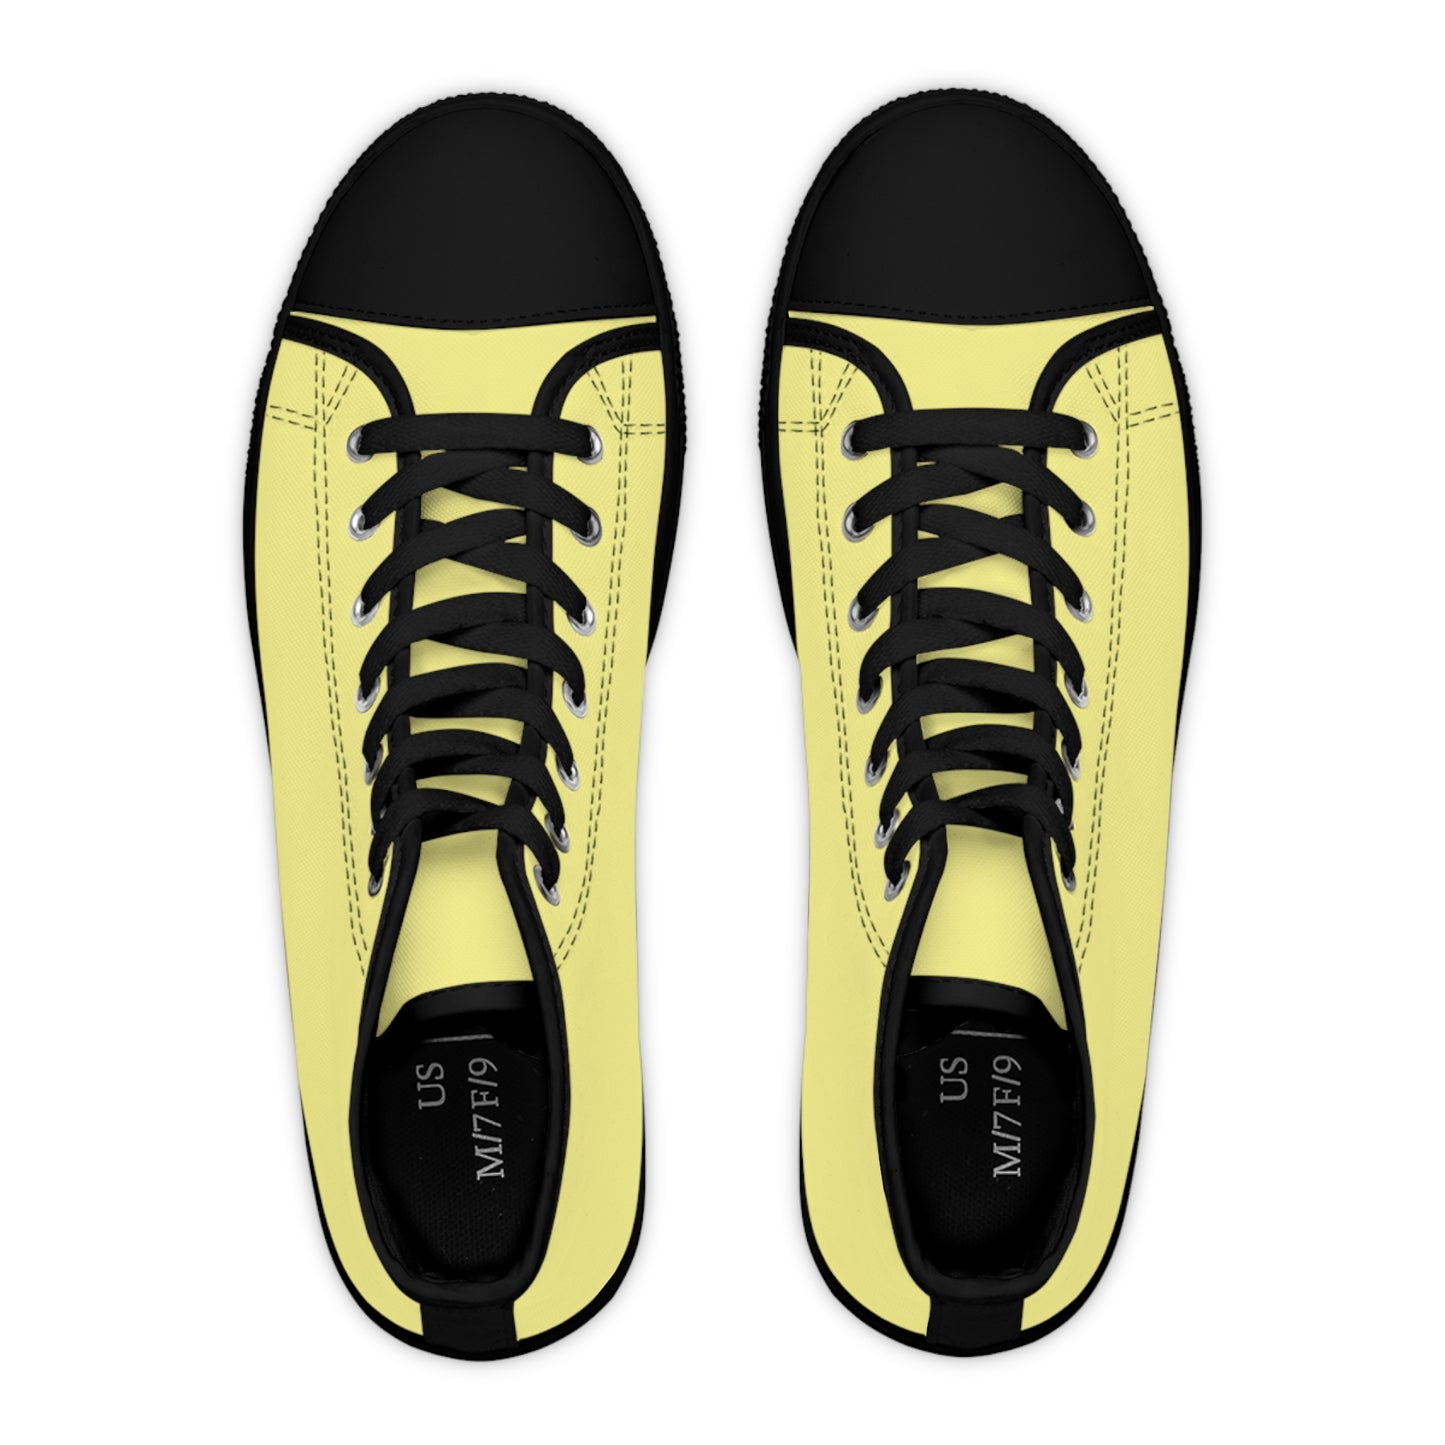 Women's Canvas High Top Solid Color Sneakers - Lemon Yellow US 12 White sole